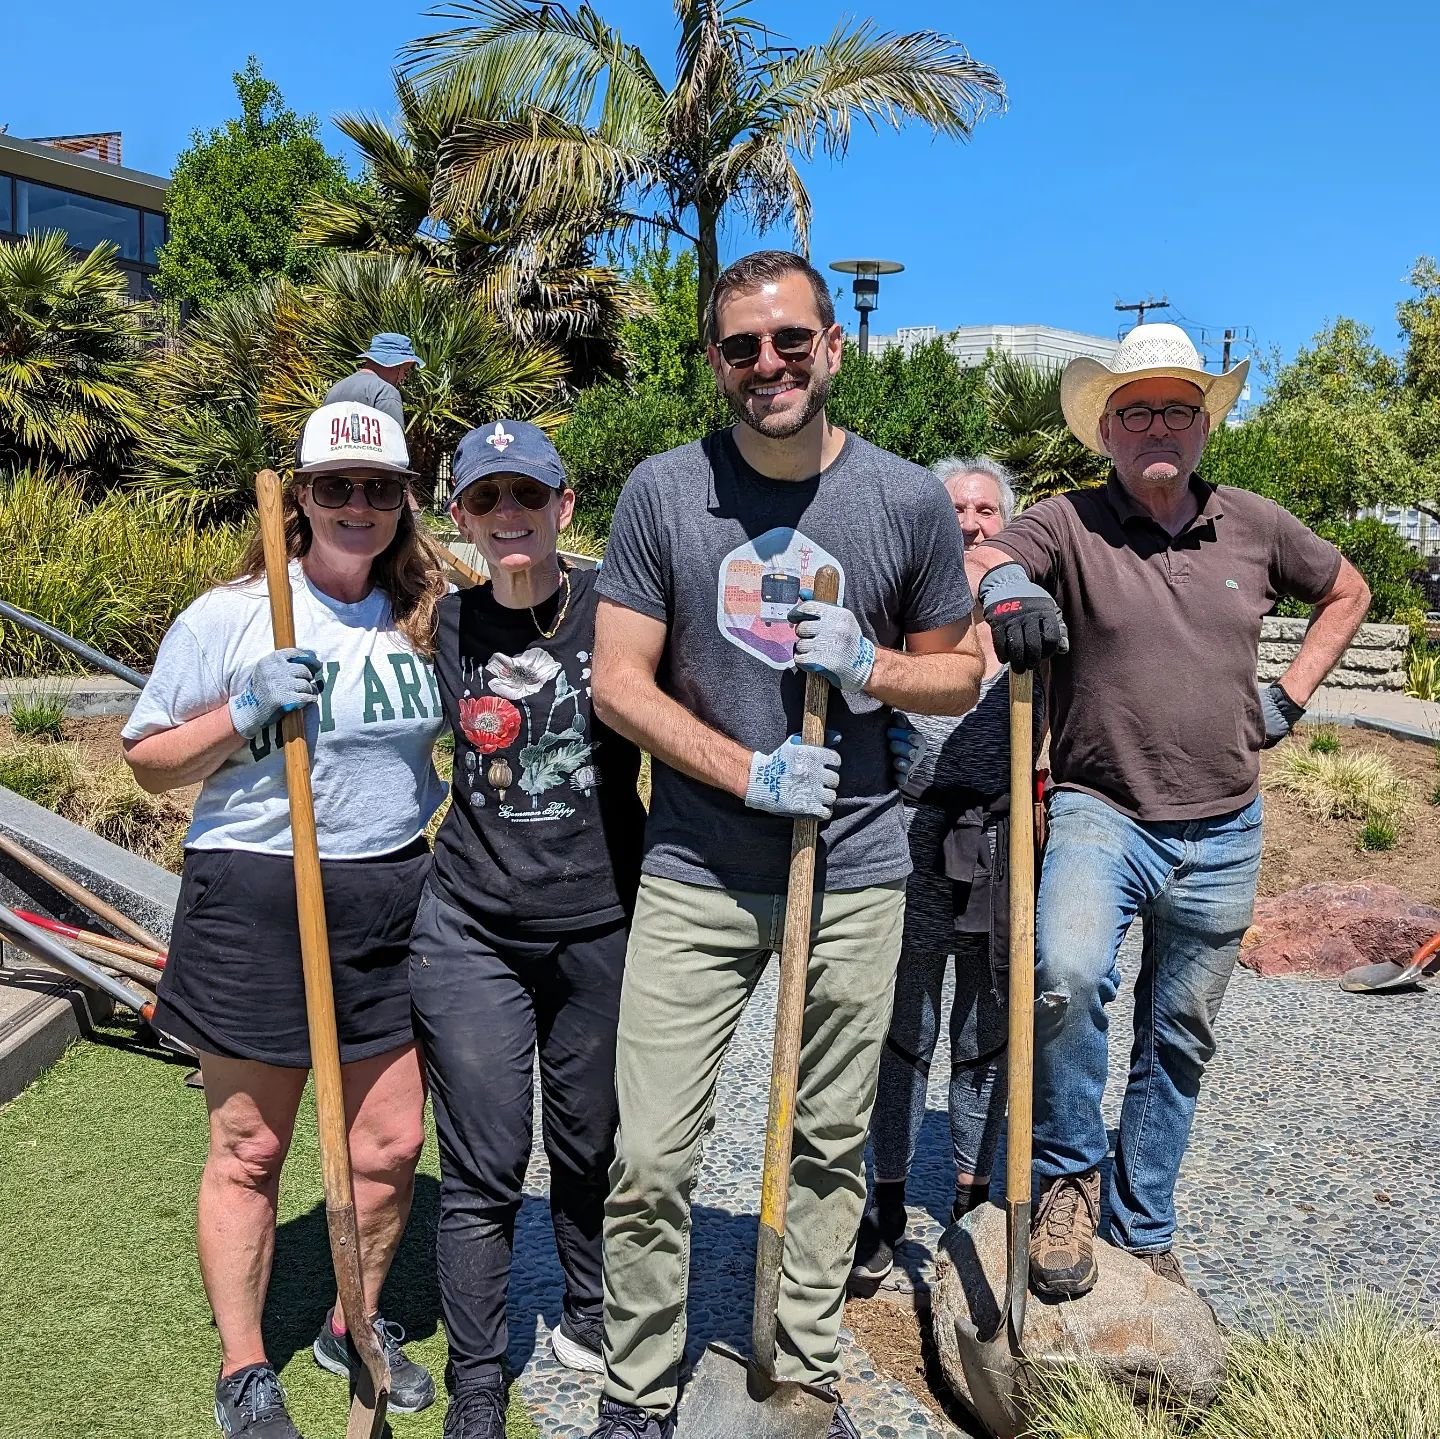 Beautiful weekend to get to work with the Friends of Joe DiMaggio Playground! We added more than 50 new plants around the playground. Thanks to this incredible group who have been stewards of our amazing North Beach open space for the last 15 years.